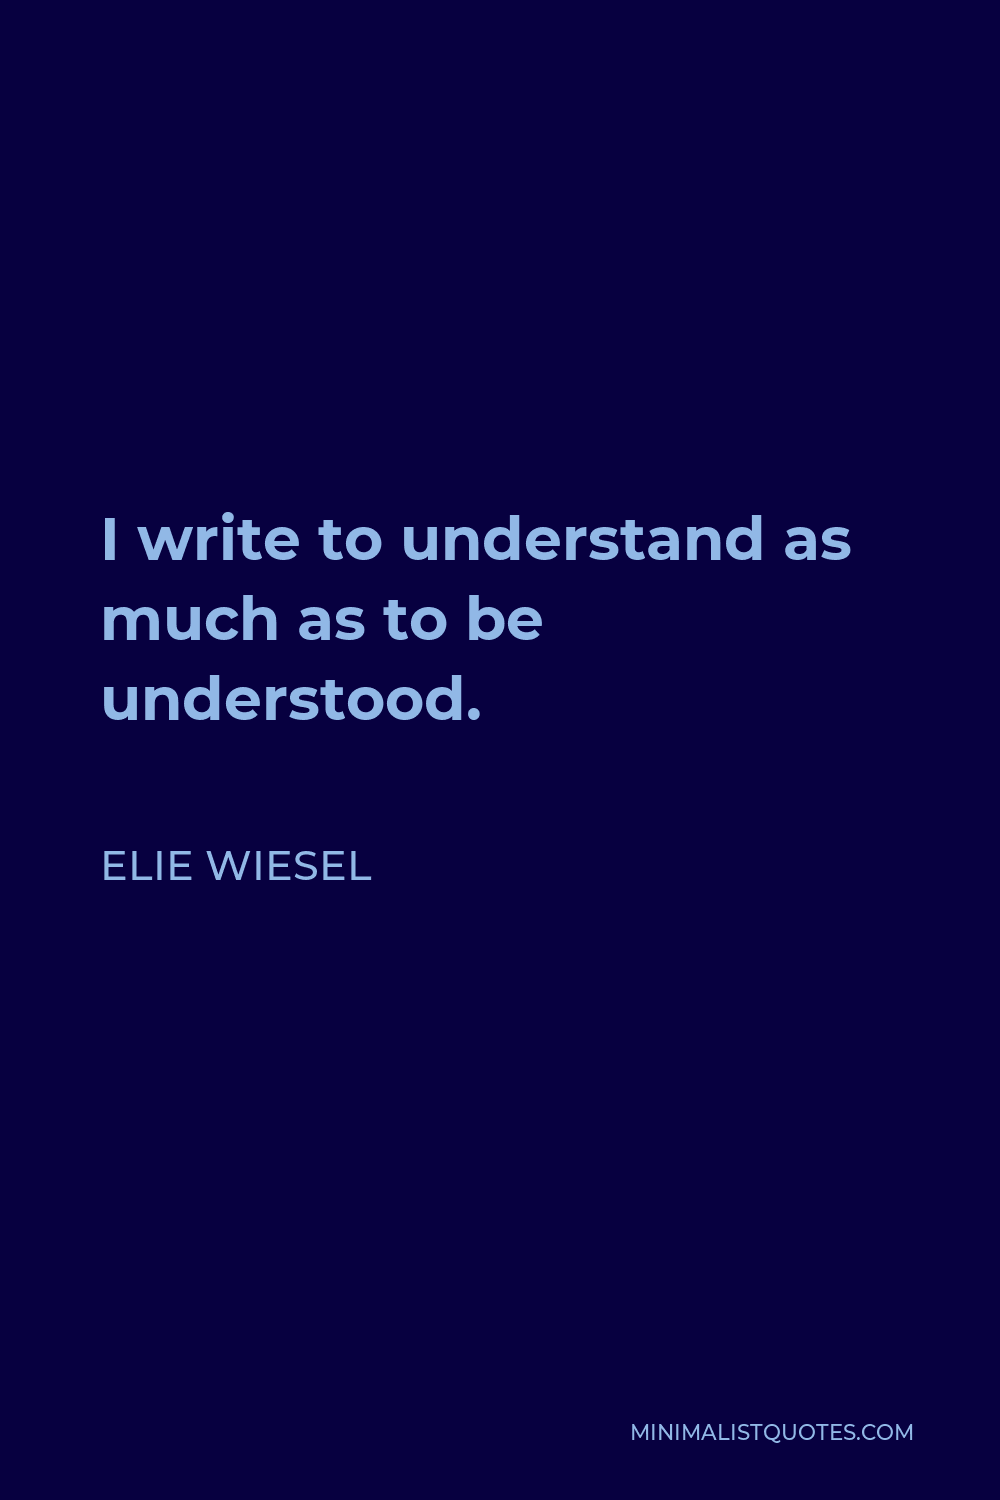 Elie Wiesel Quote - I write to understand as much as to be understood.